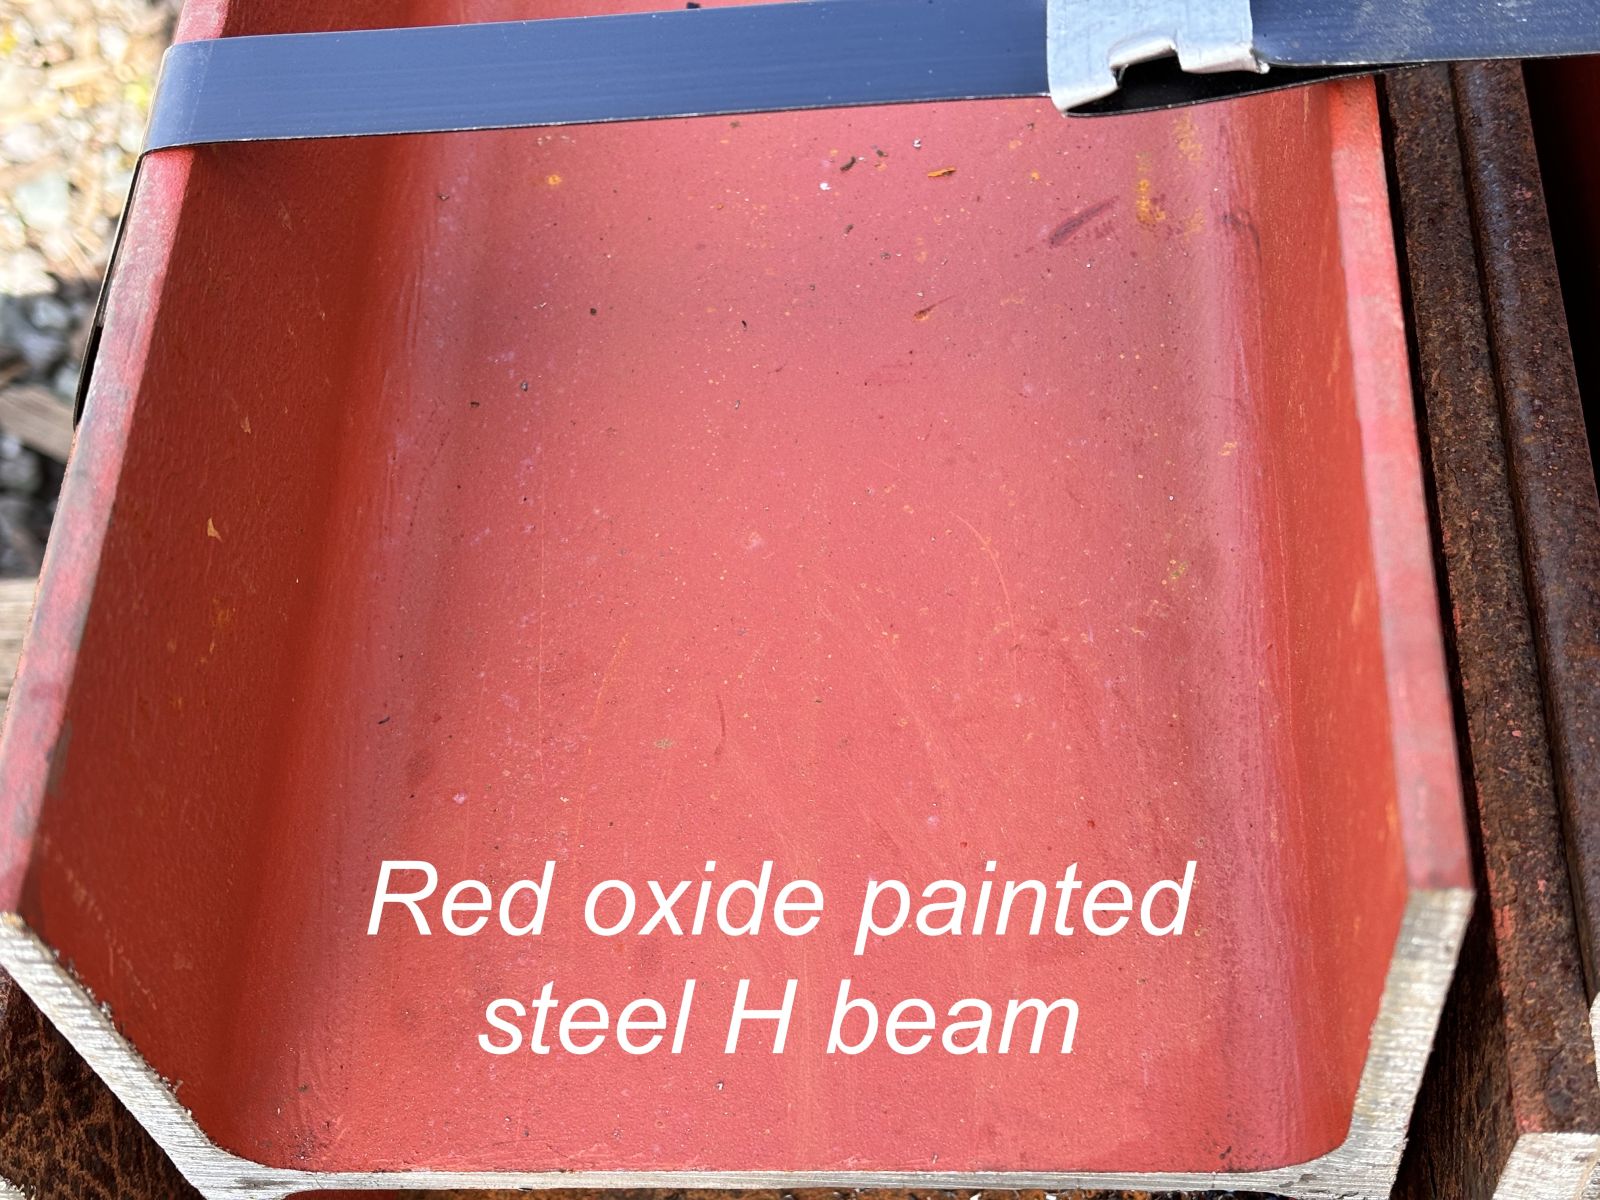 Red oxide painted H beam to use with railway sleepers that acts as an undercoat but will naturally develop a rusty red surface if left unpainted. Railwaysleepers.com